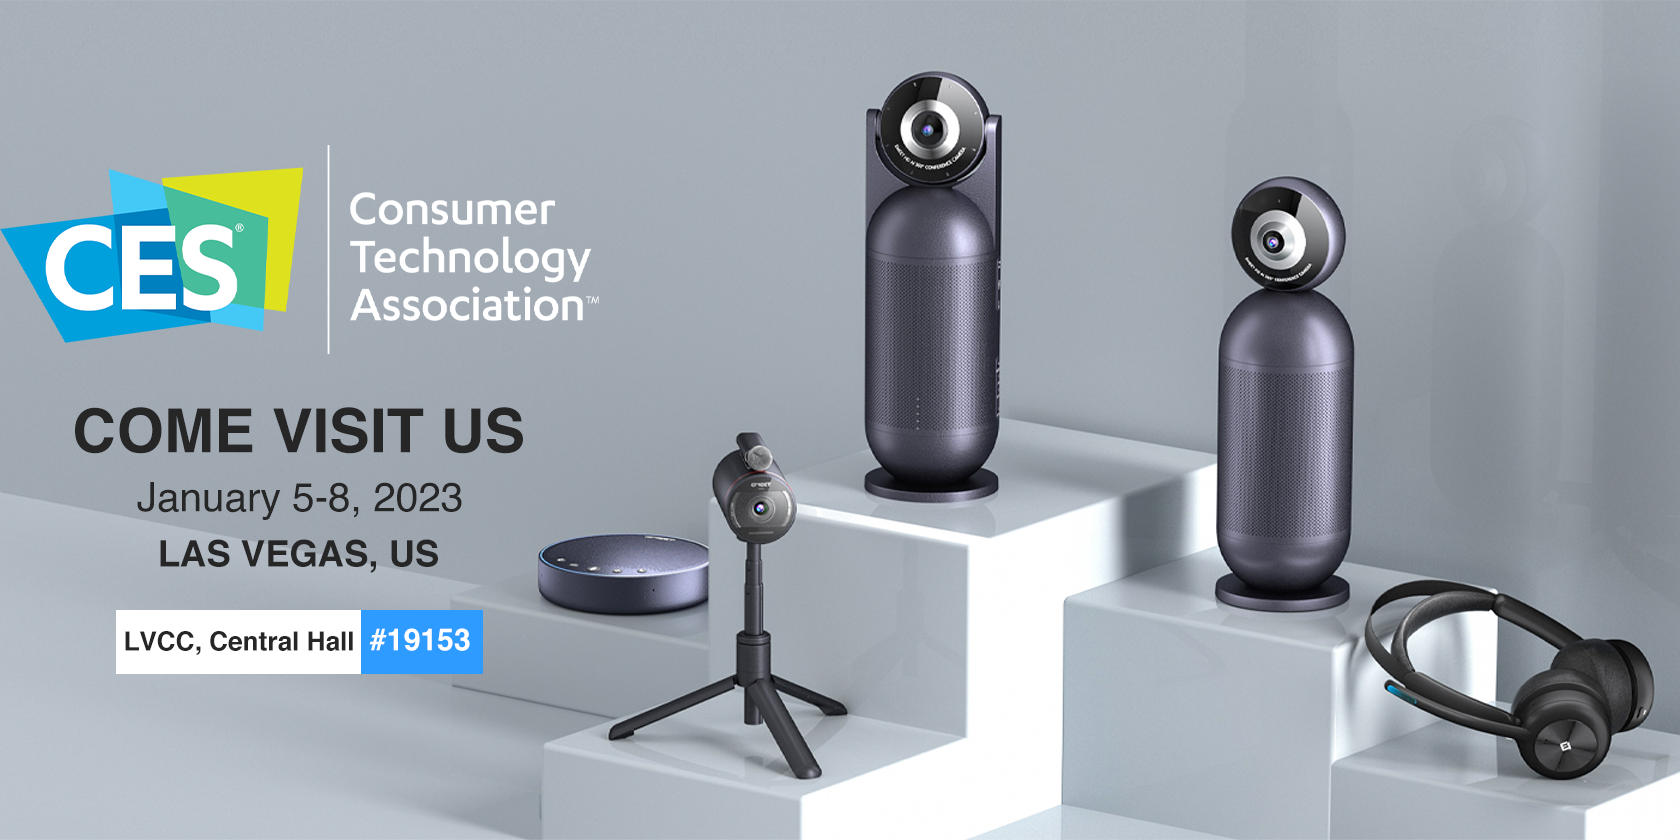 Emeet product lineup for CES 2023